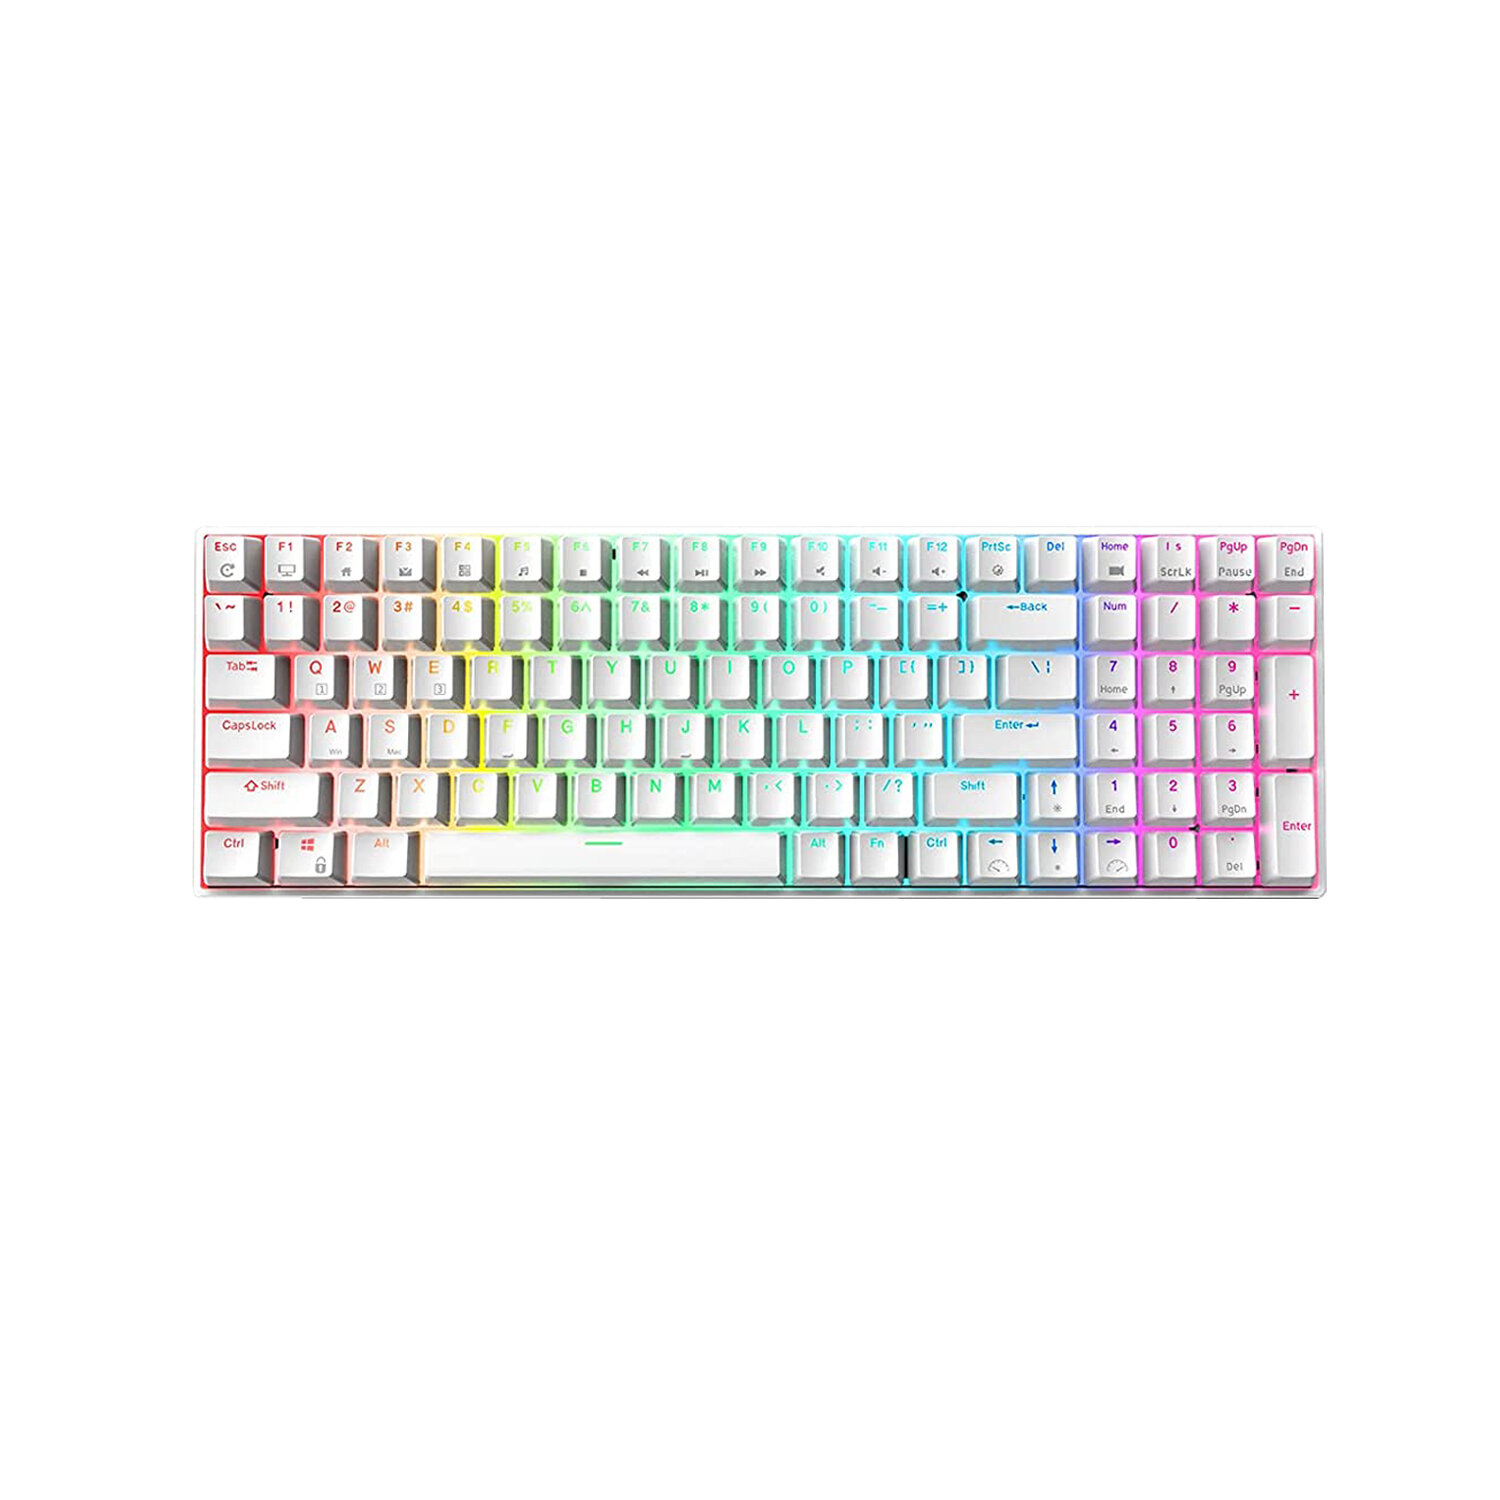 Image of Royal Kludge RK100 Mechanical Keyboard 100 Keys Triple Mode Wireless bluetooth50 + 24Ghz + Type-C Wired Hot-swappable